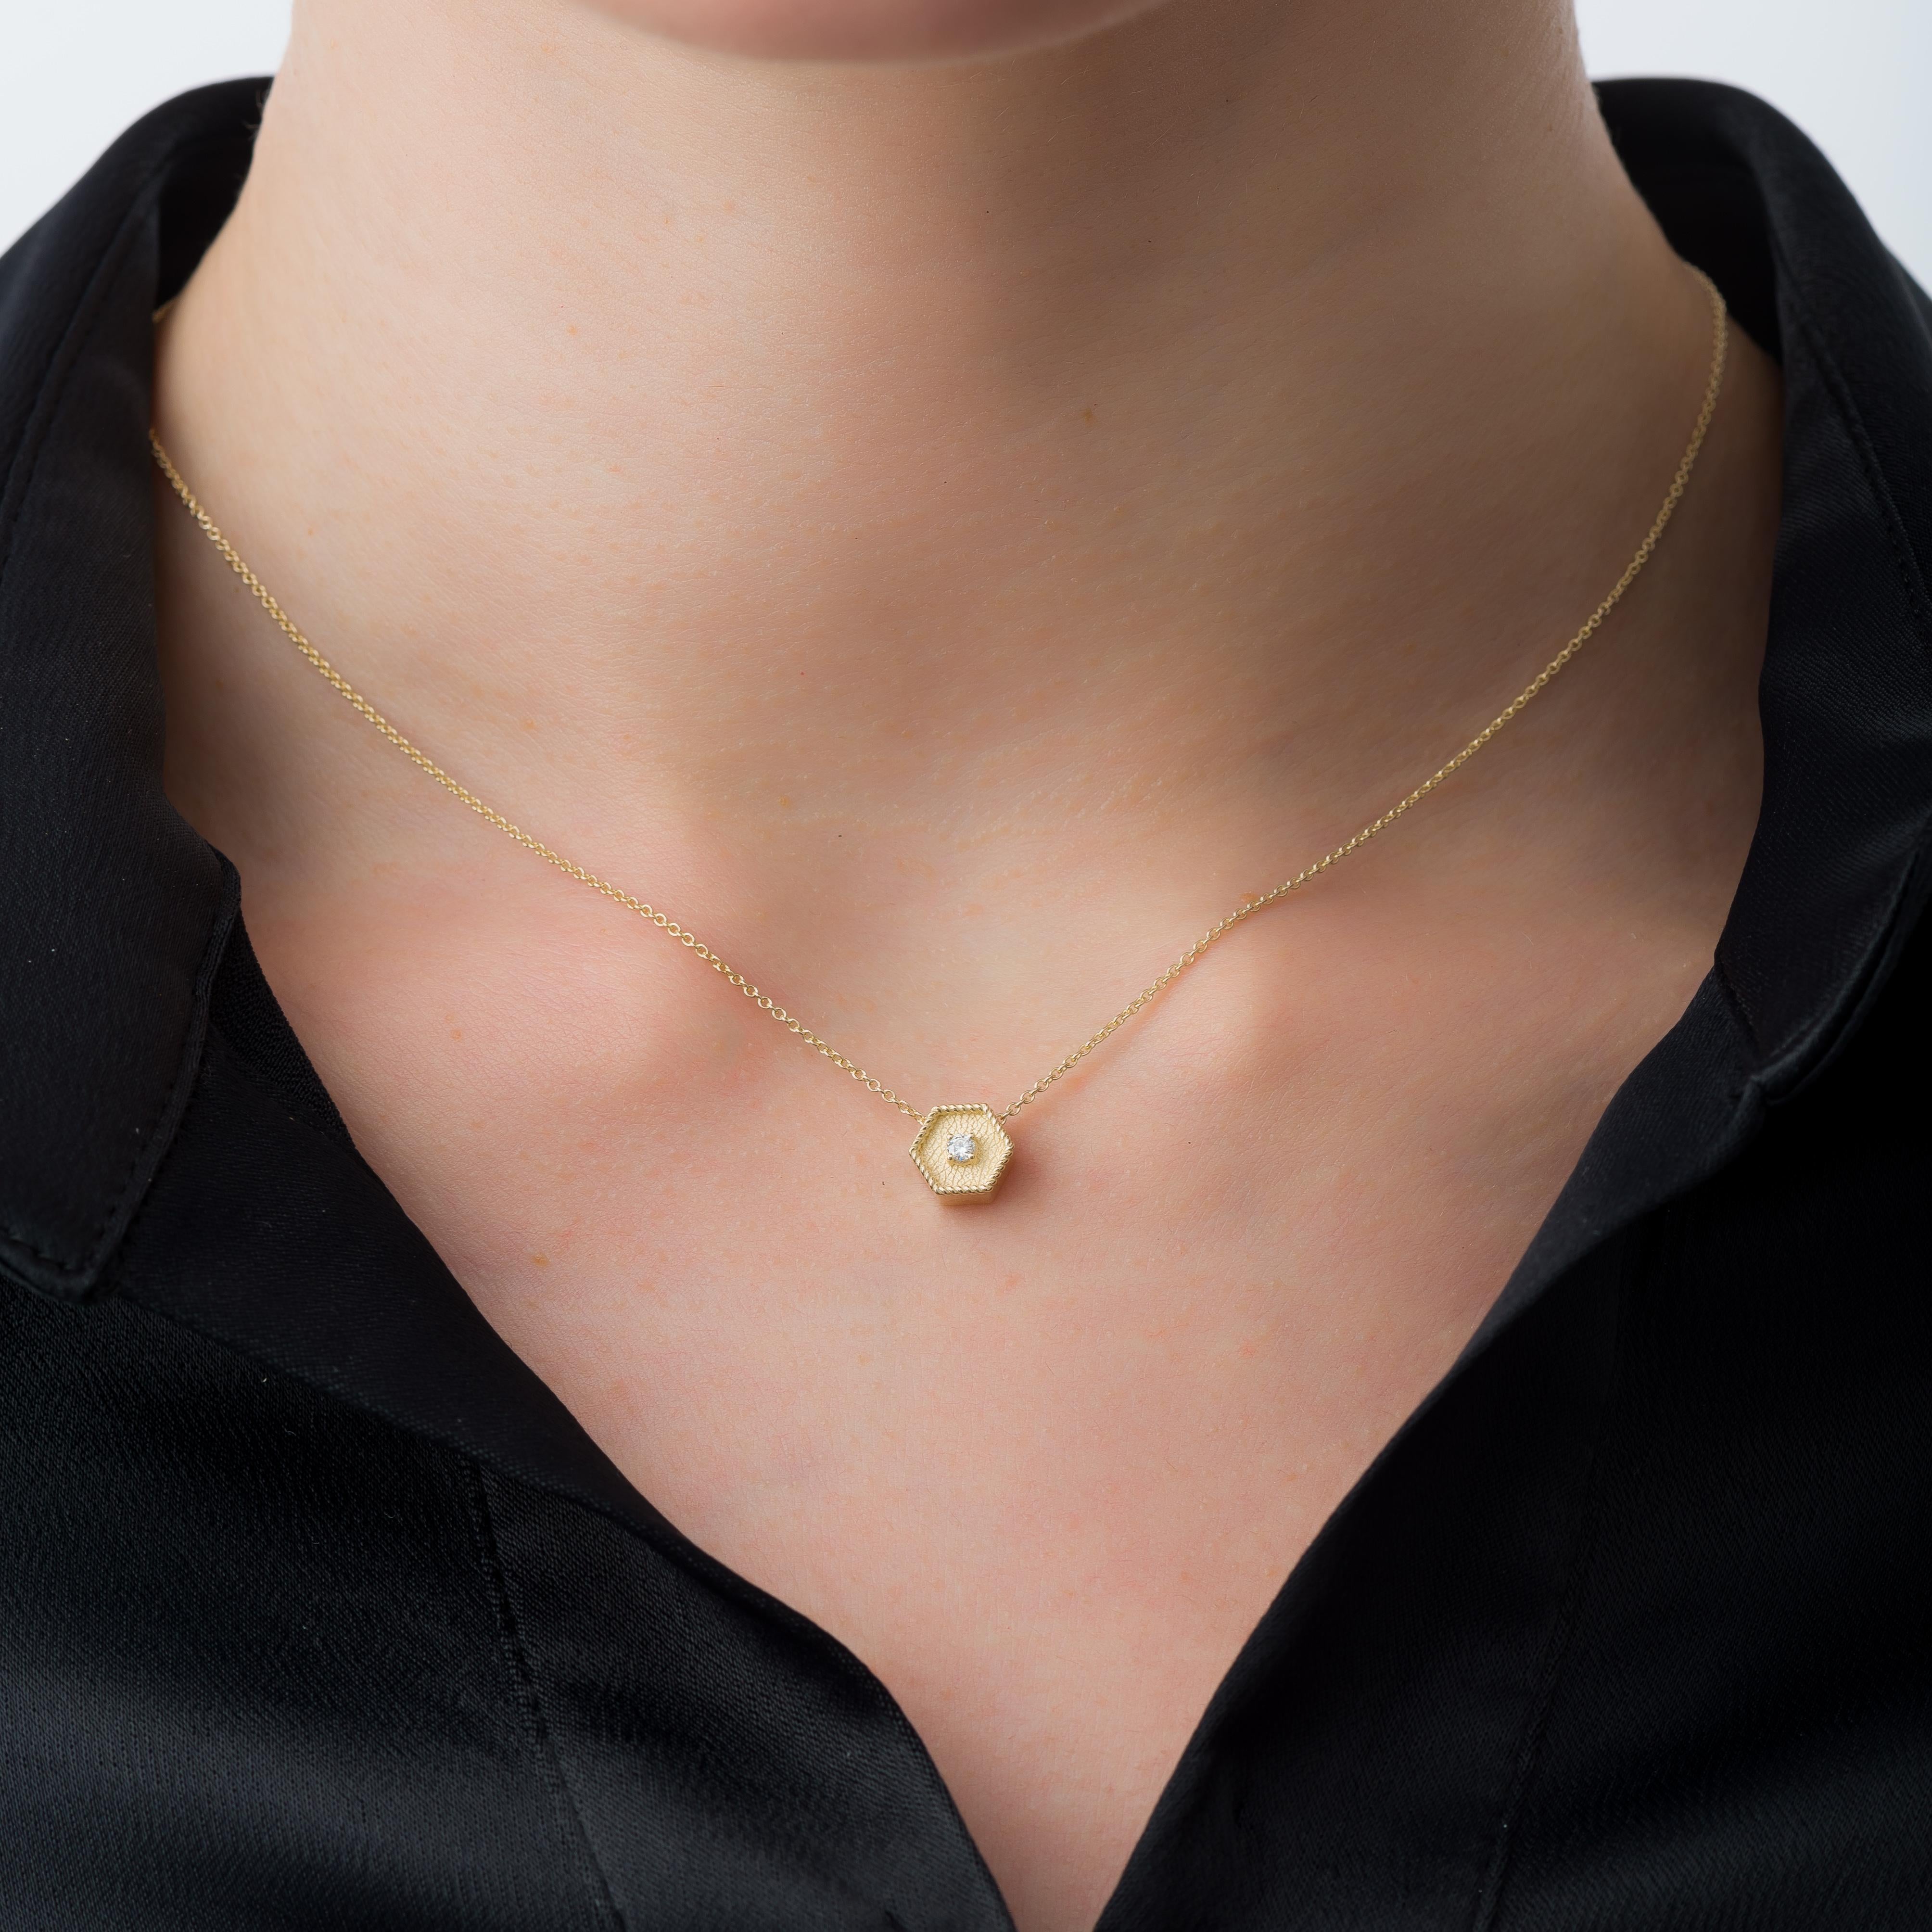 Elevate your style with our gold polygon pendant, featuring a mesmerizing diamond that adds a touch of timeless brilliance to your look.

100% handmade in our workshop.

Metal: 18K Gold
Gemstones: Diamond  weight 0,05 ct

Every pendant is